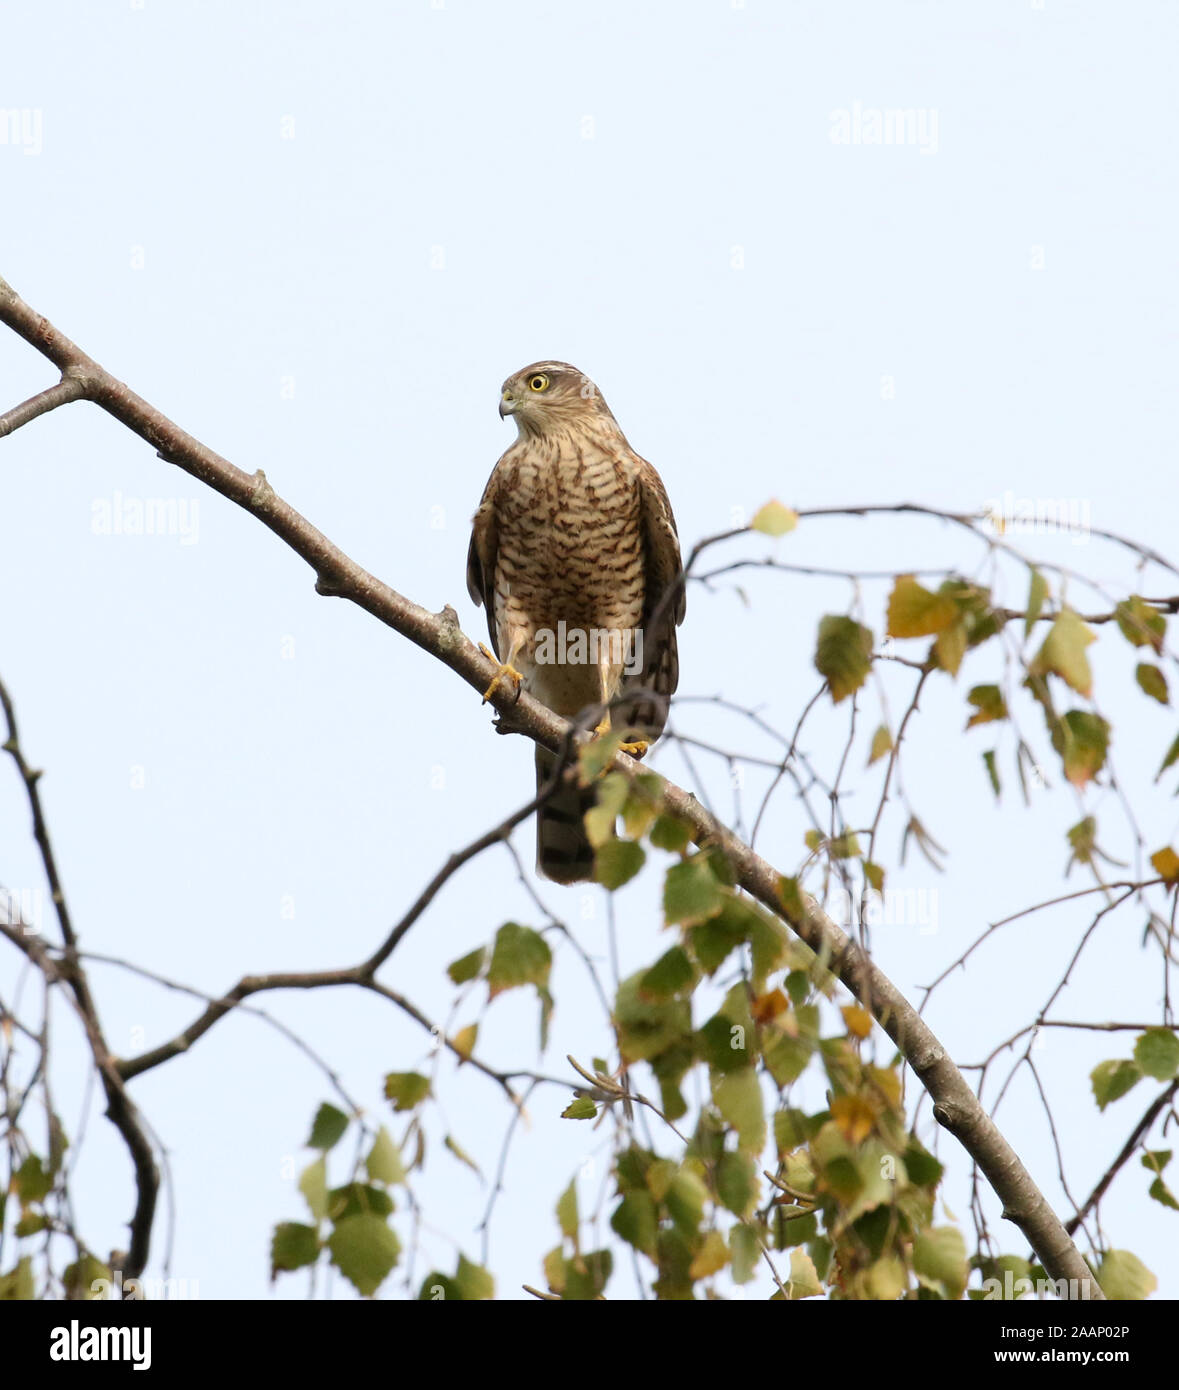 A Female Eurasian Sparrowhawk  (Accipiter nisus) perched on a branch in a garden in East Midlands, UK. Stock Photo